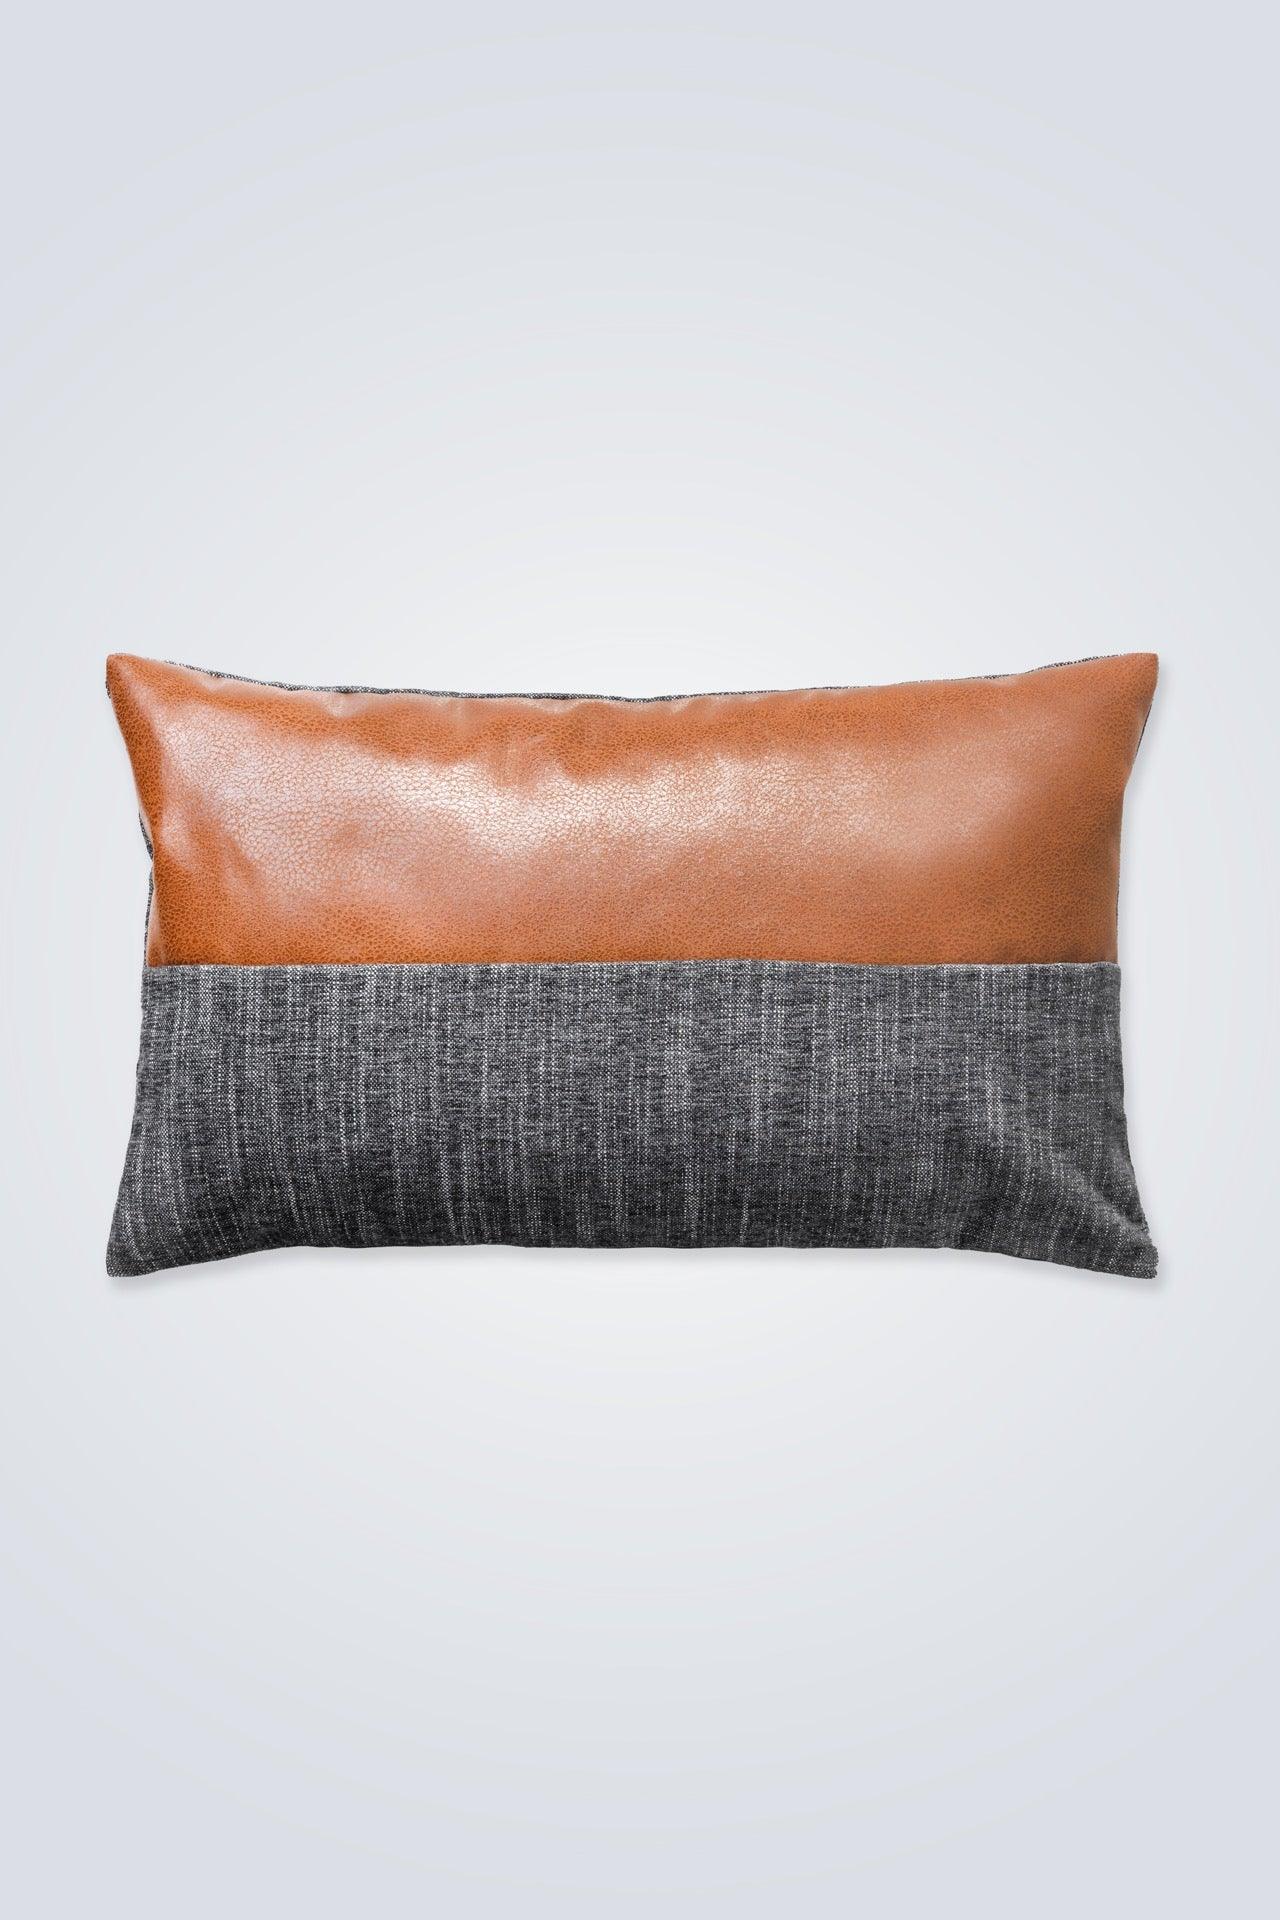 Vegan Leather Inset Rectangle Throw Pillow - NOT LABELED